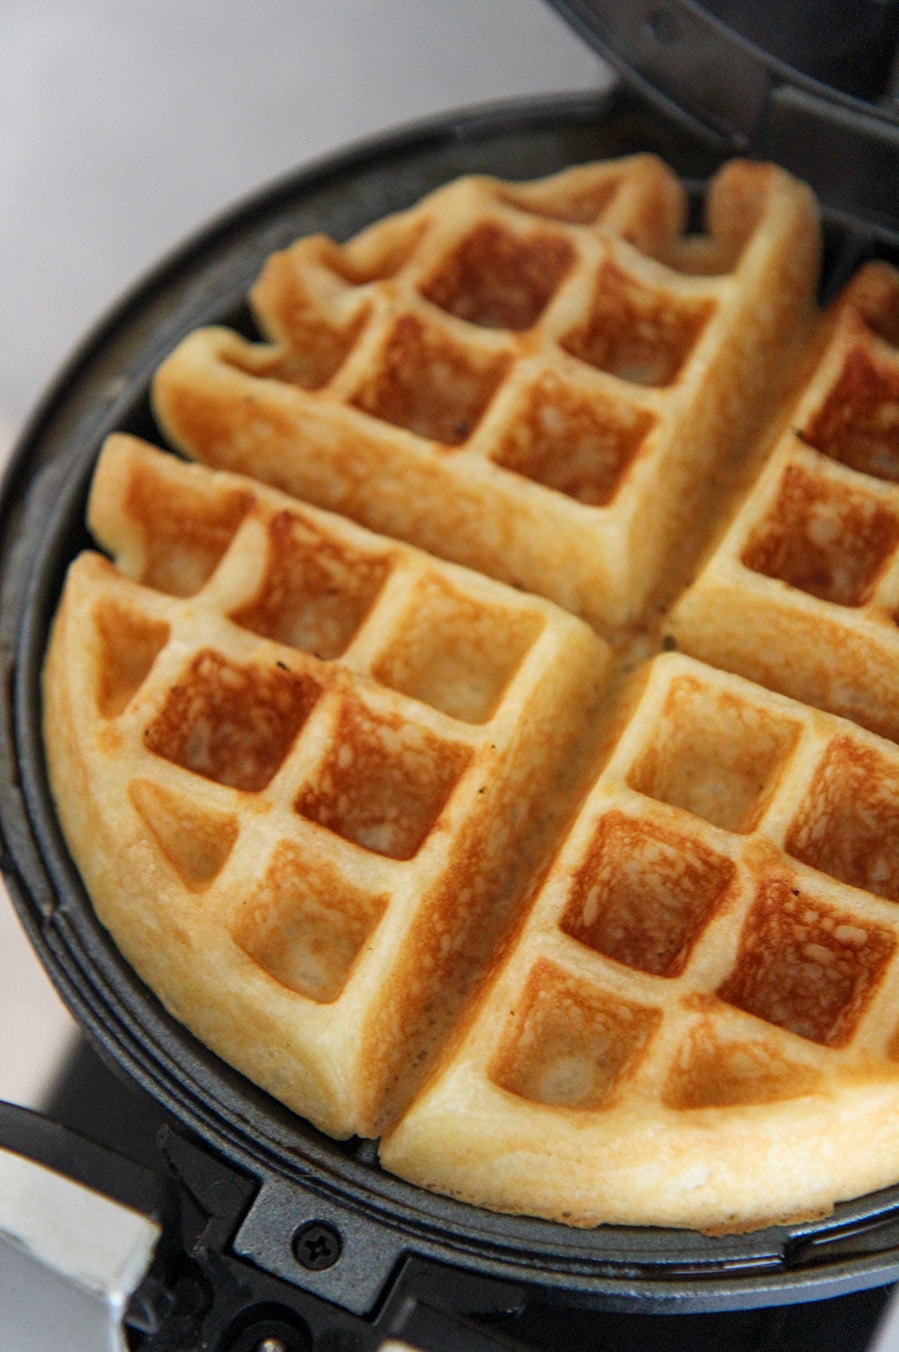 cooked waffle in a waffle iron.